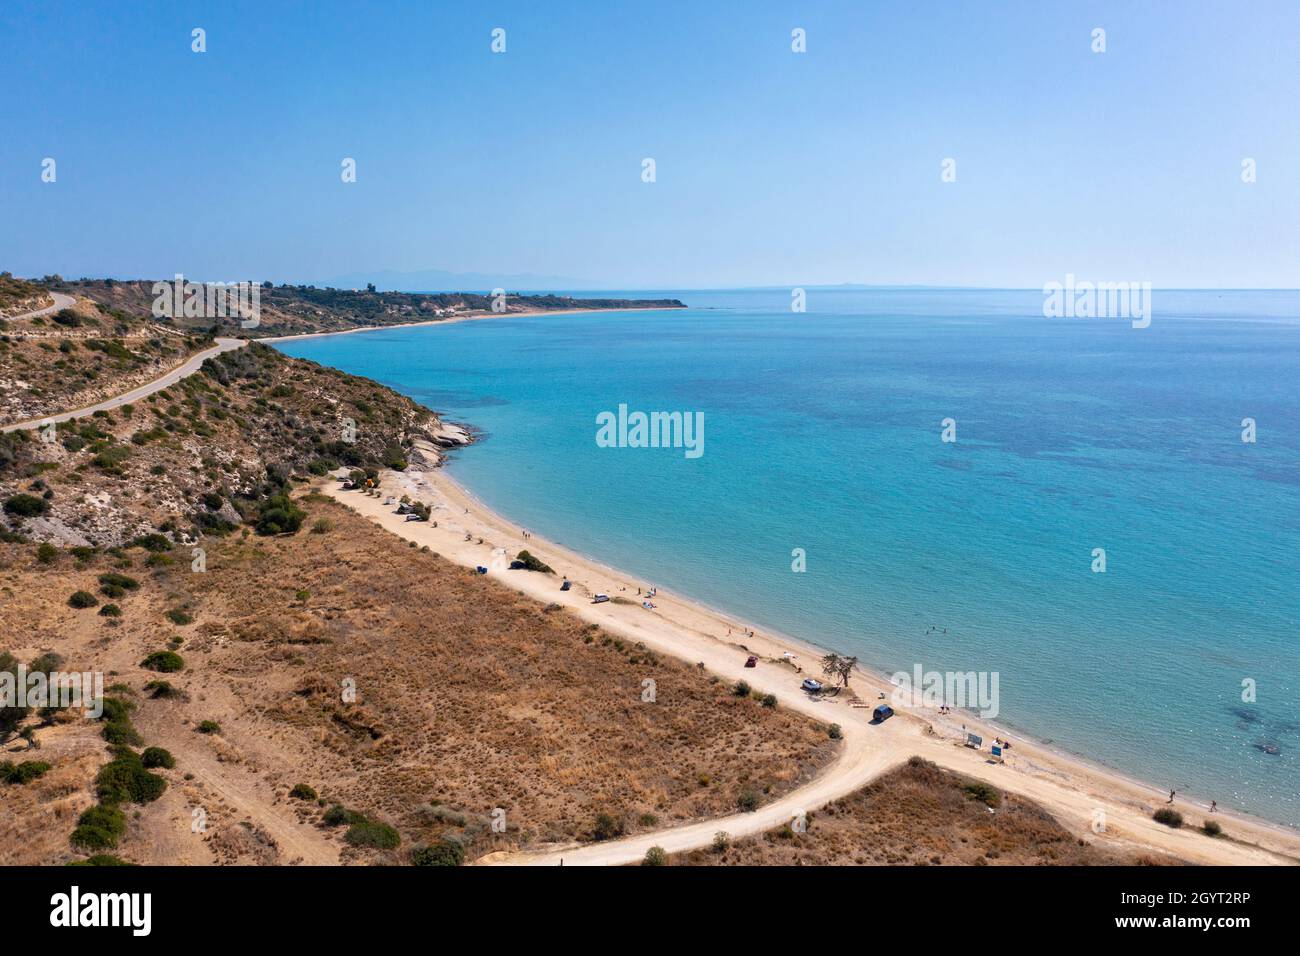 Aerial landscape view of a beach (Paralia Katelios) on the south coast of Kefalonia, Ionian Islands, Greece Stock Photo